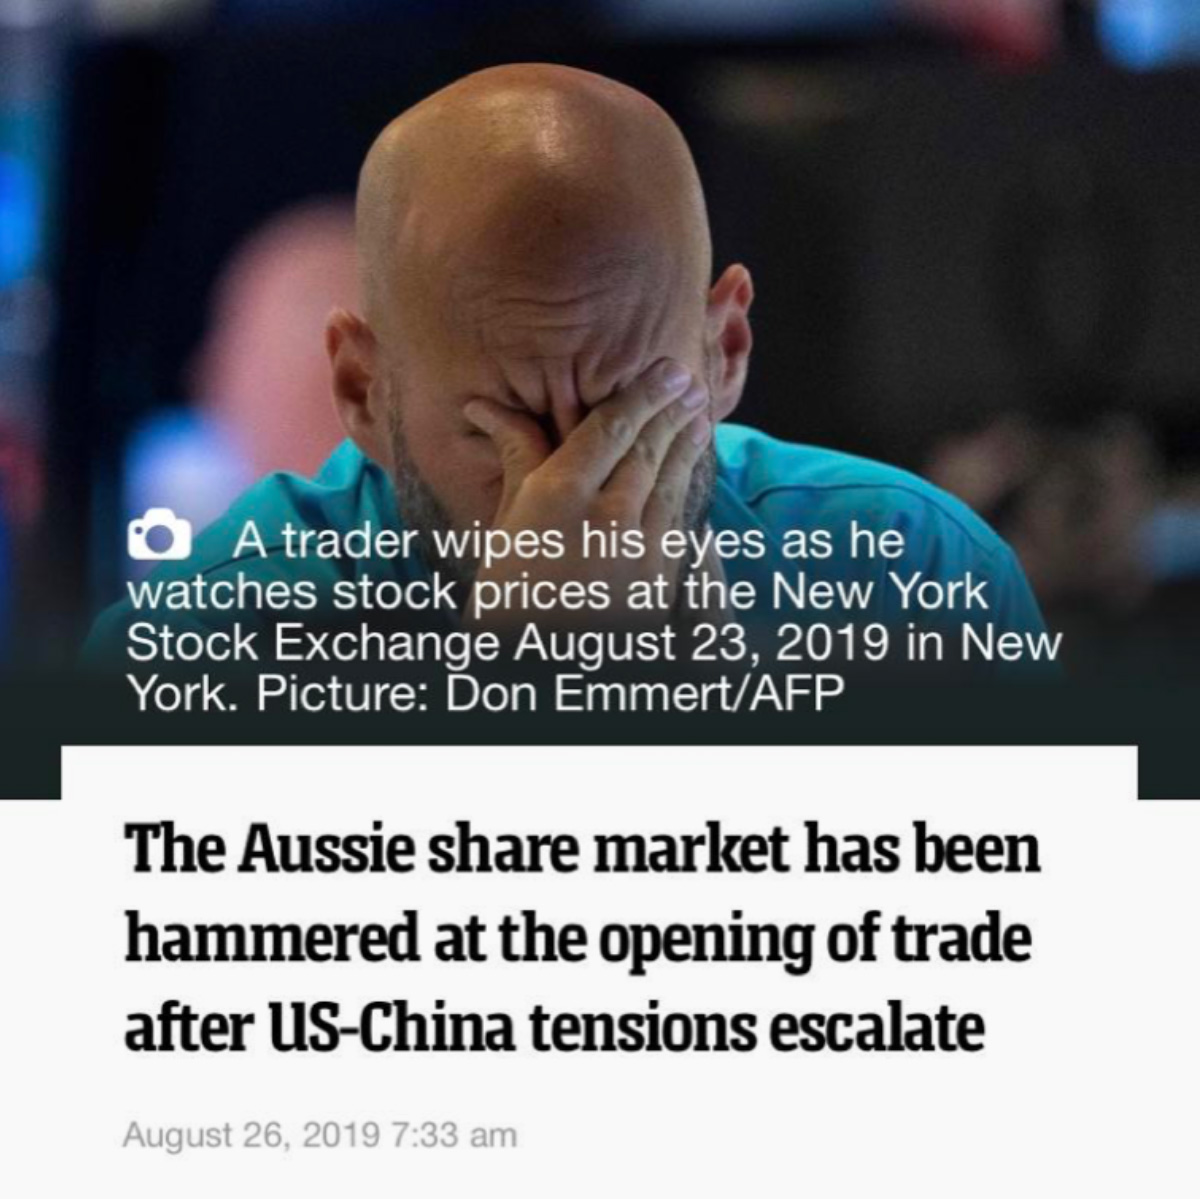 Trader wipes his eyes as he watches stock prices at the New York Stock Exchange.